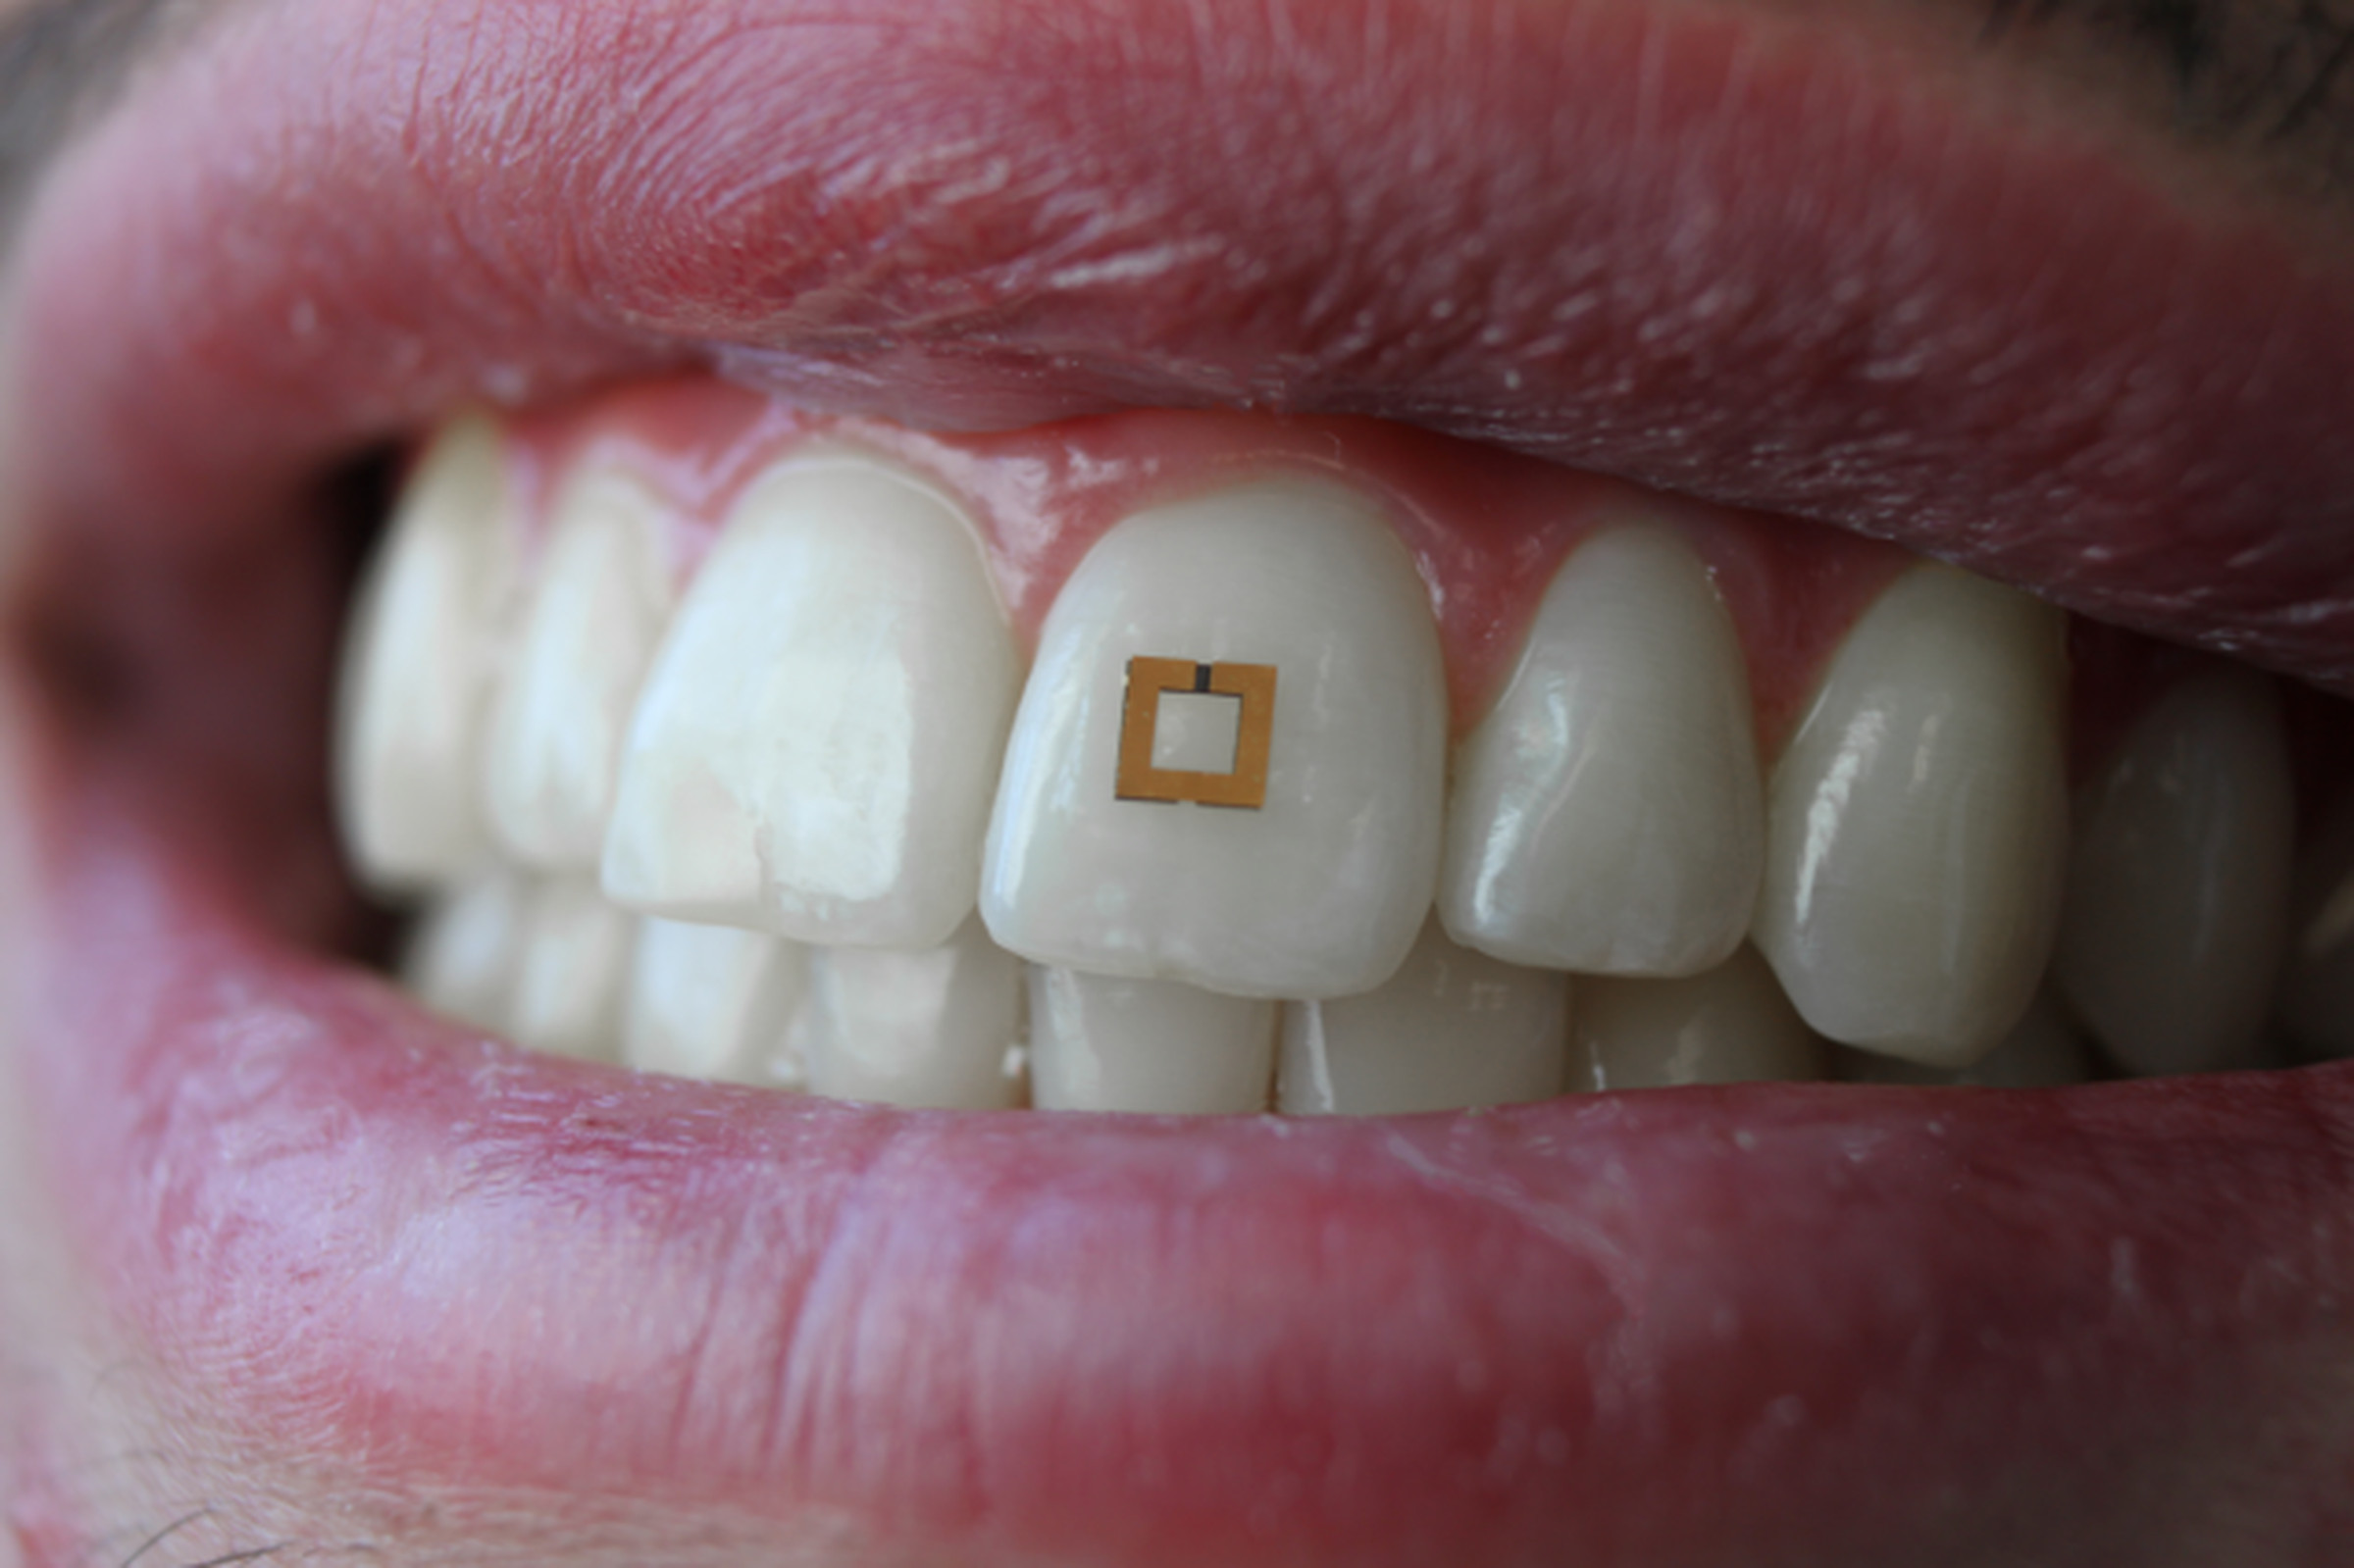 A tooth-mounted sensor that can monitor glucose, alcohol, and salt.